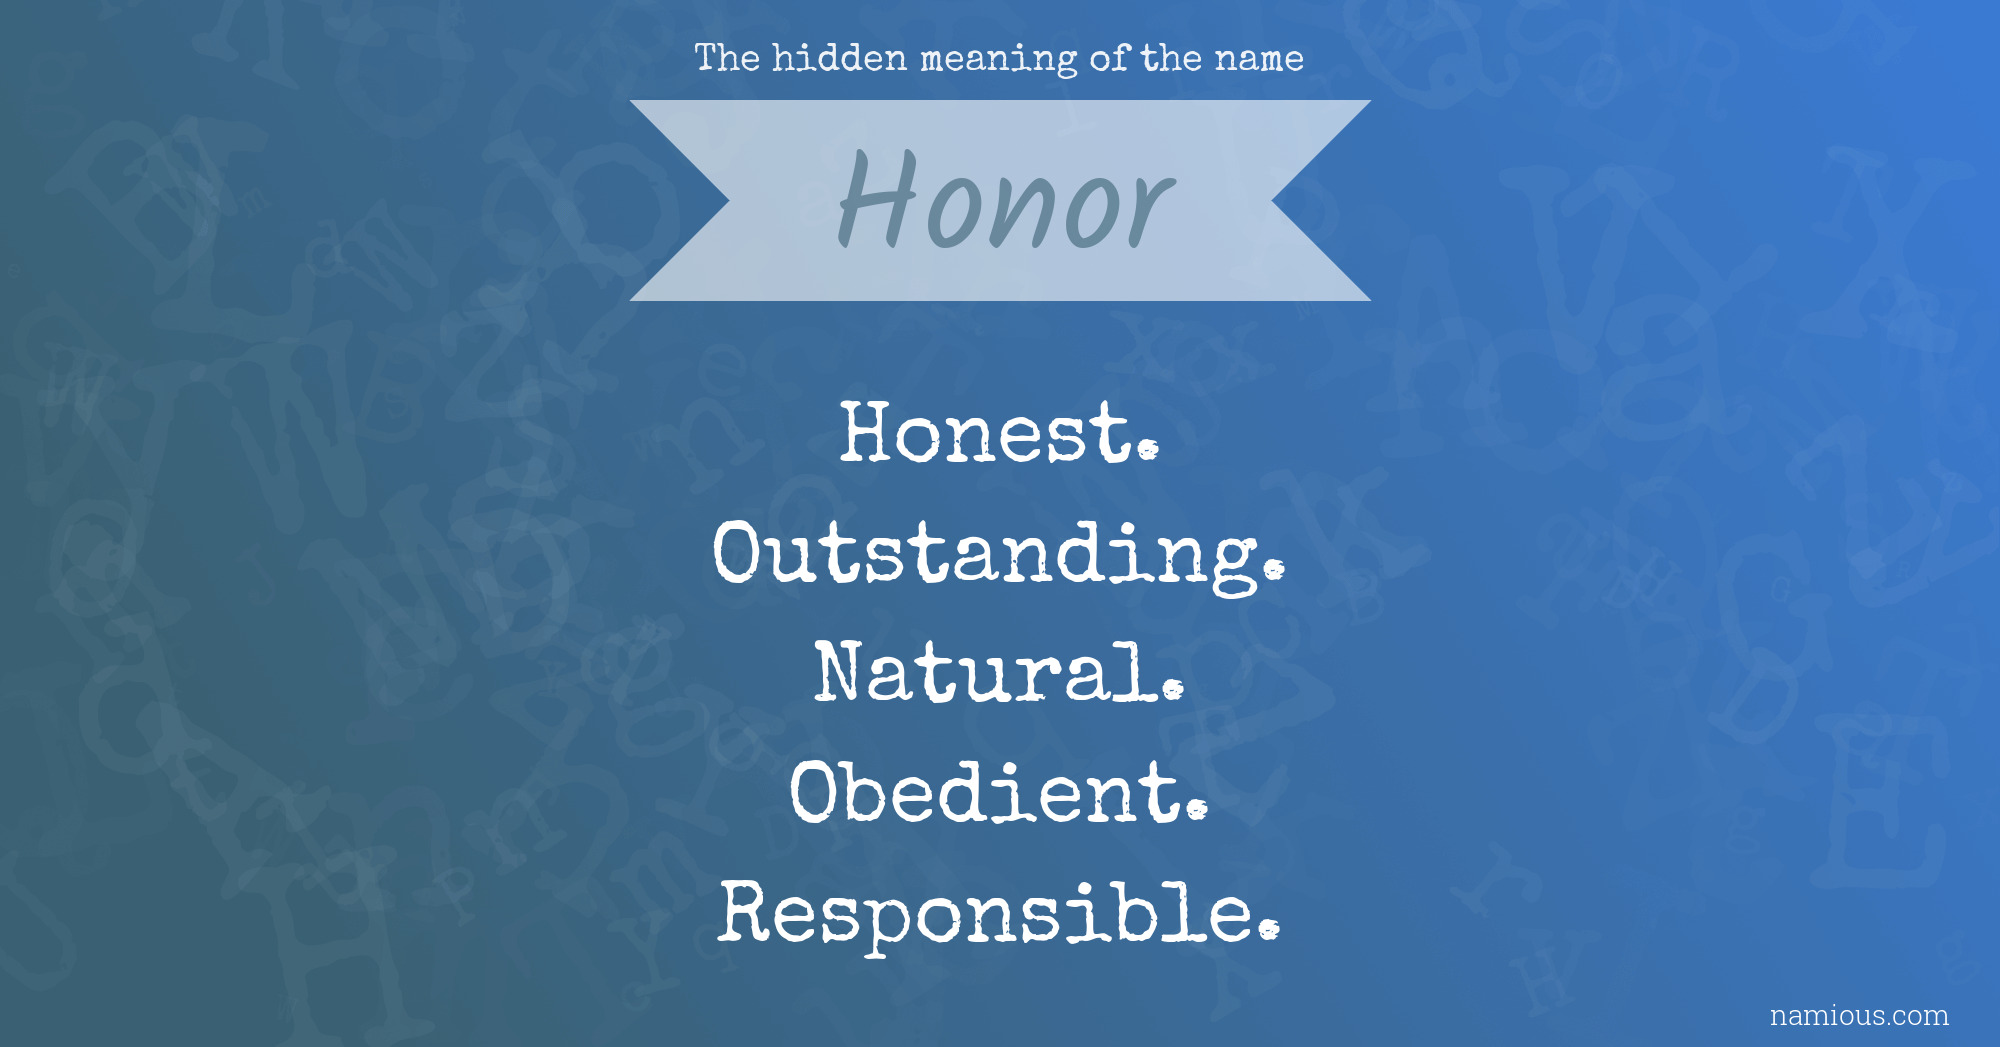 honor meaning